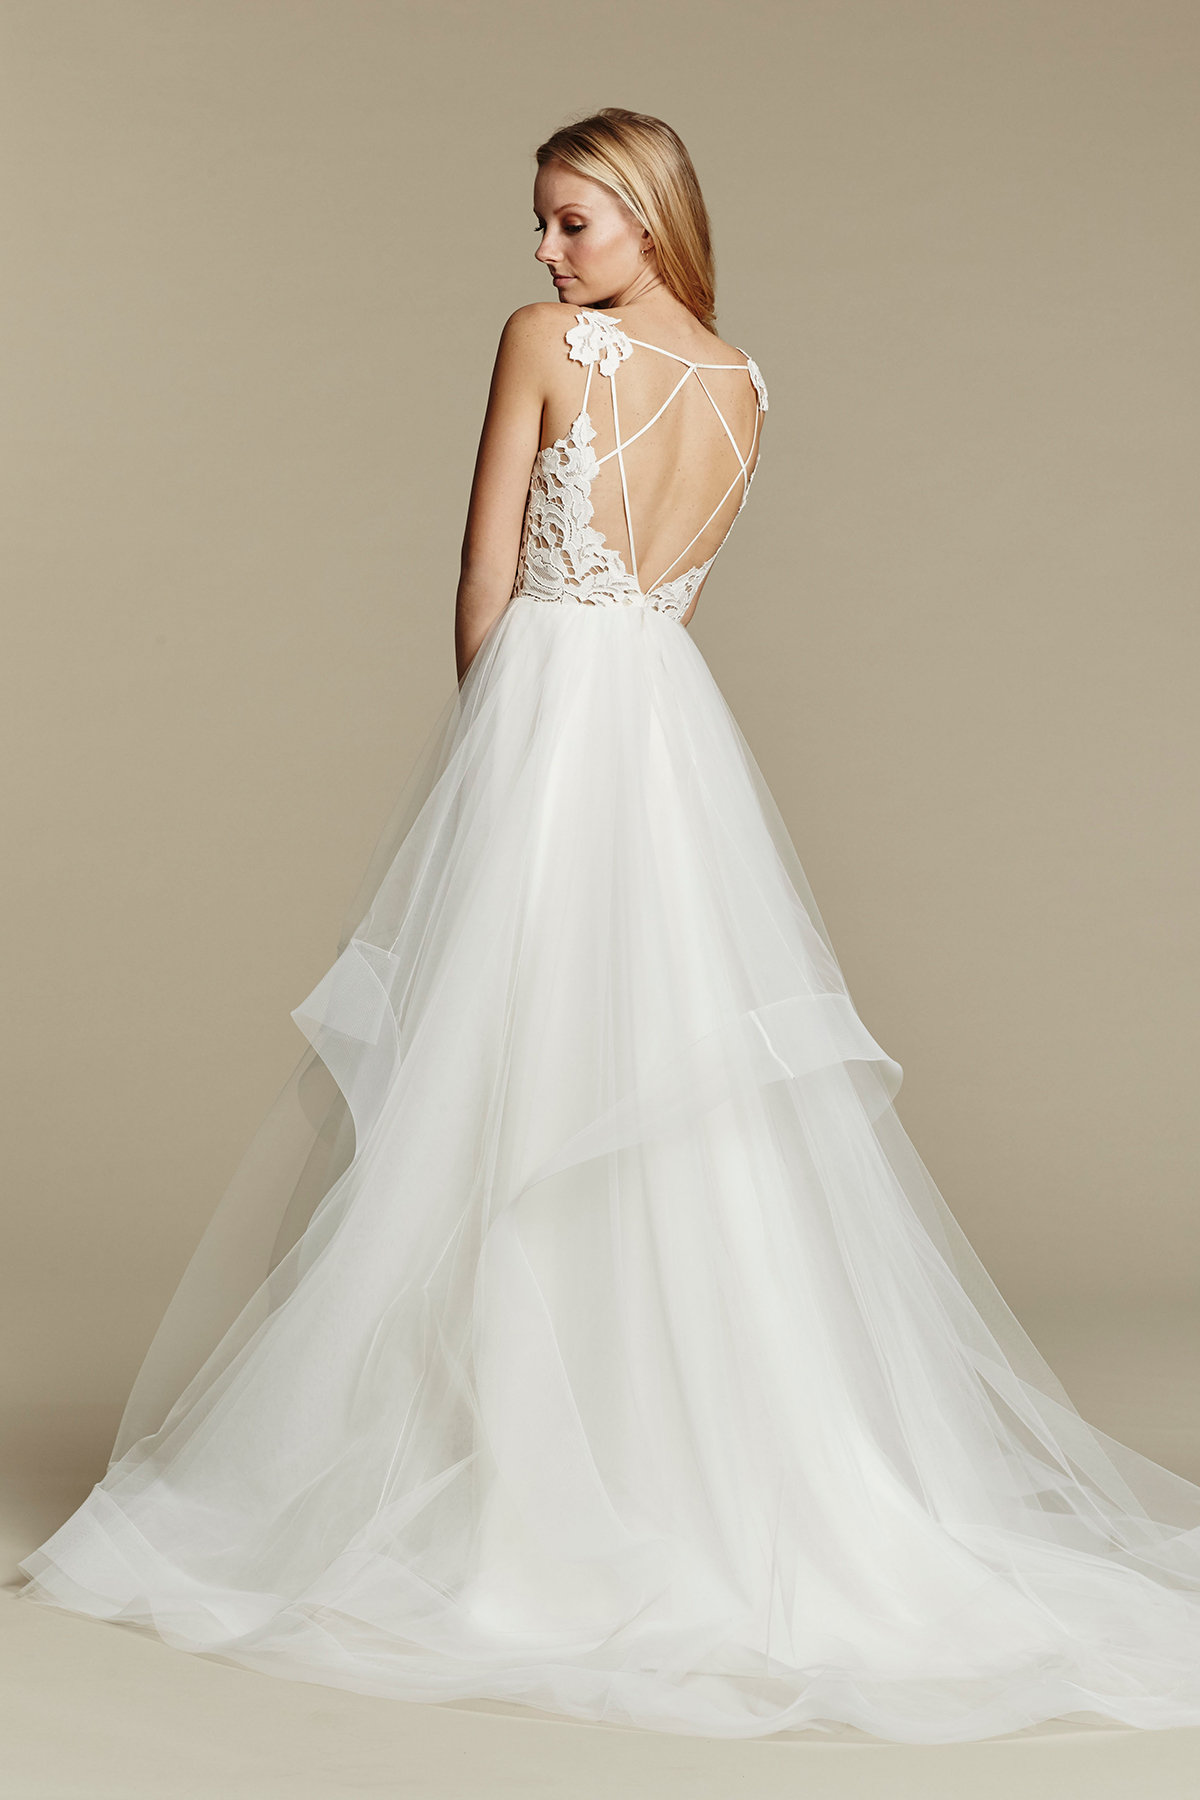 Hayley Paige bridal lace tulle ball gown